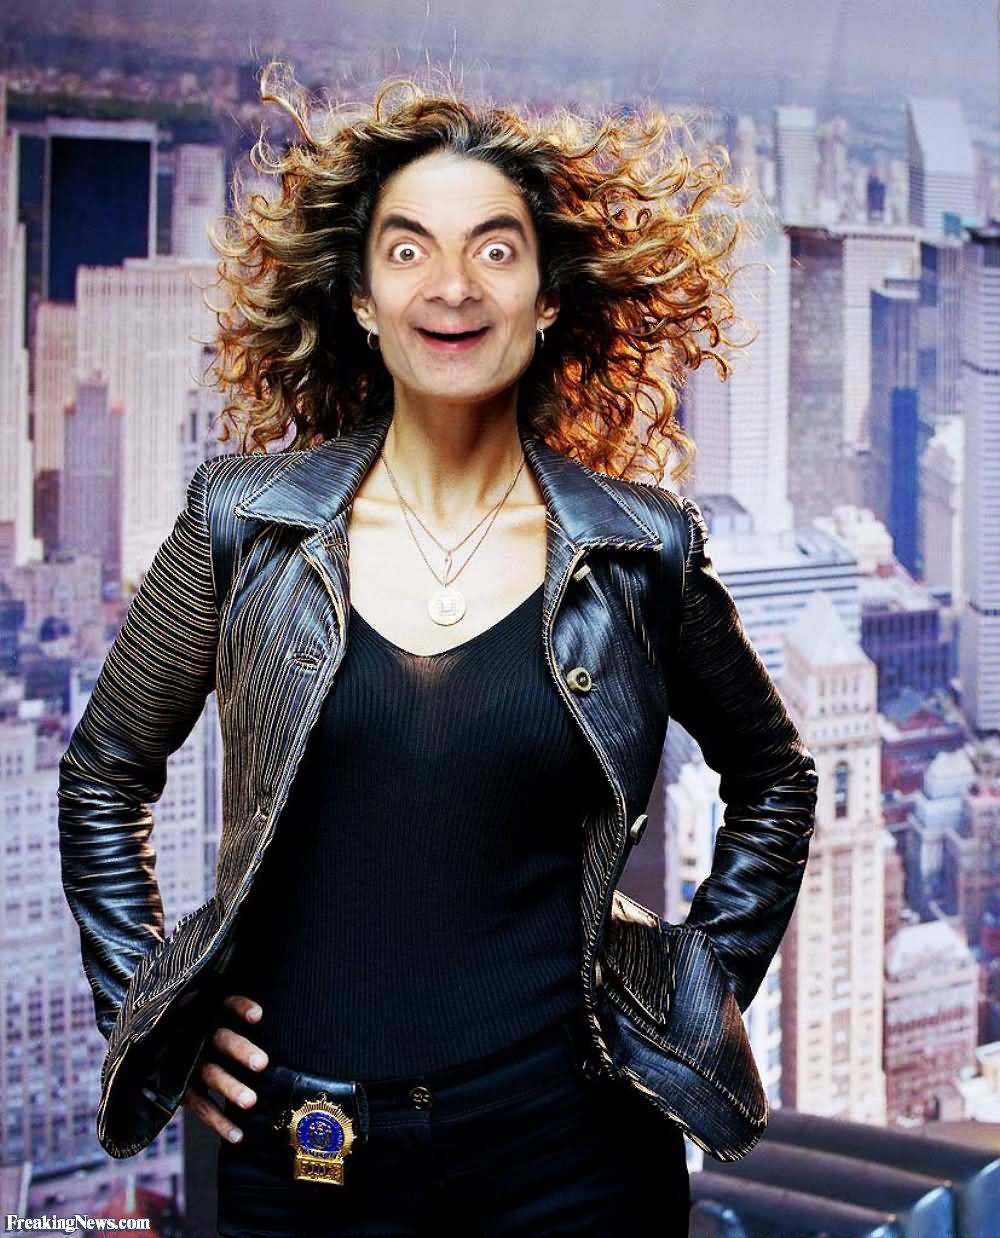 Mr Bean As Melina Kanakaredes Funny Photoshop Picture